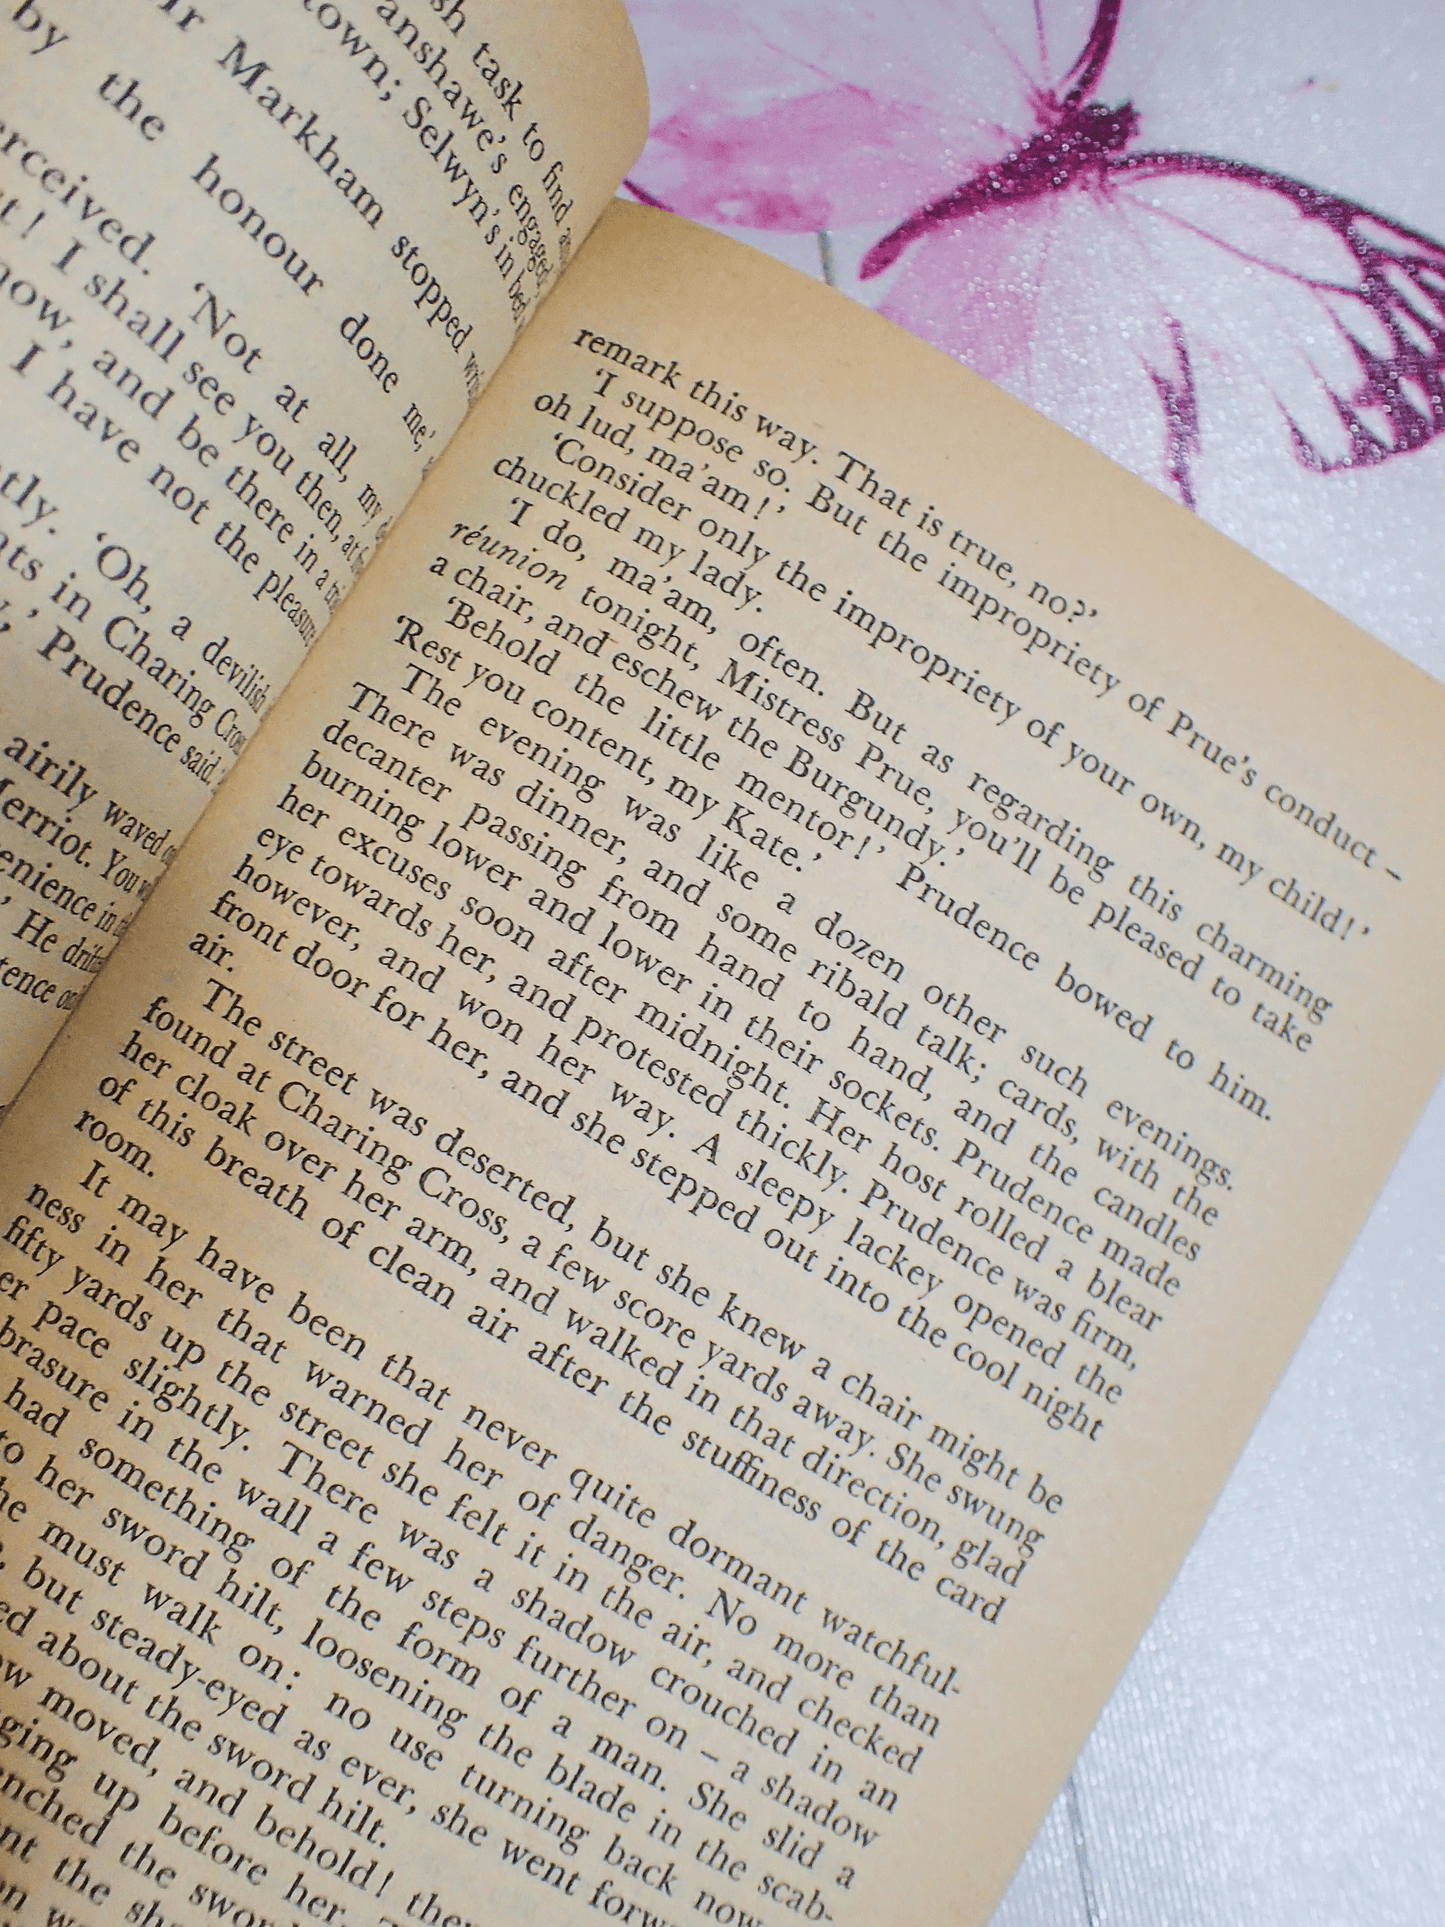 Pages from vintage Pan paperback book, 'The Masqueraders', by Georgette Heyer. 'The evening was like a dozen other such evenings...'